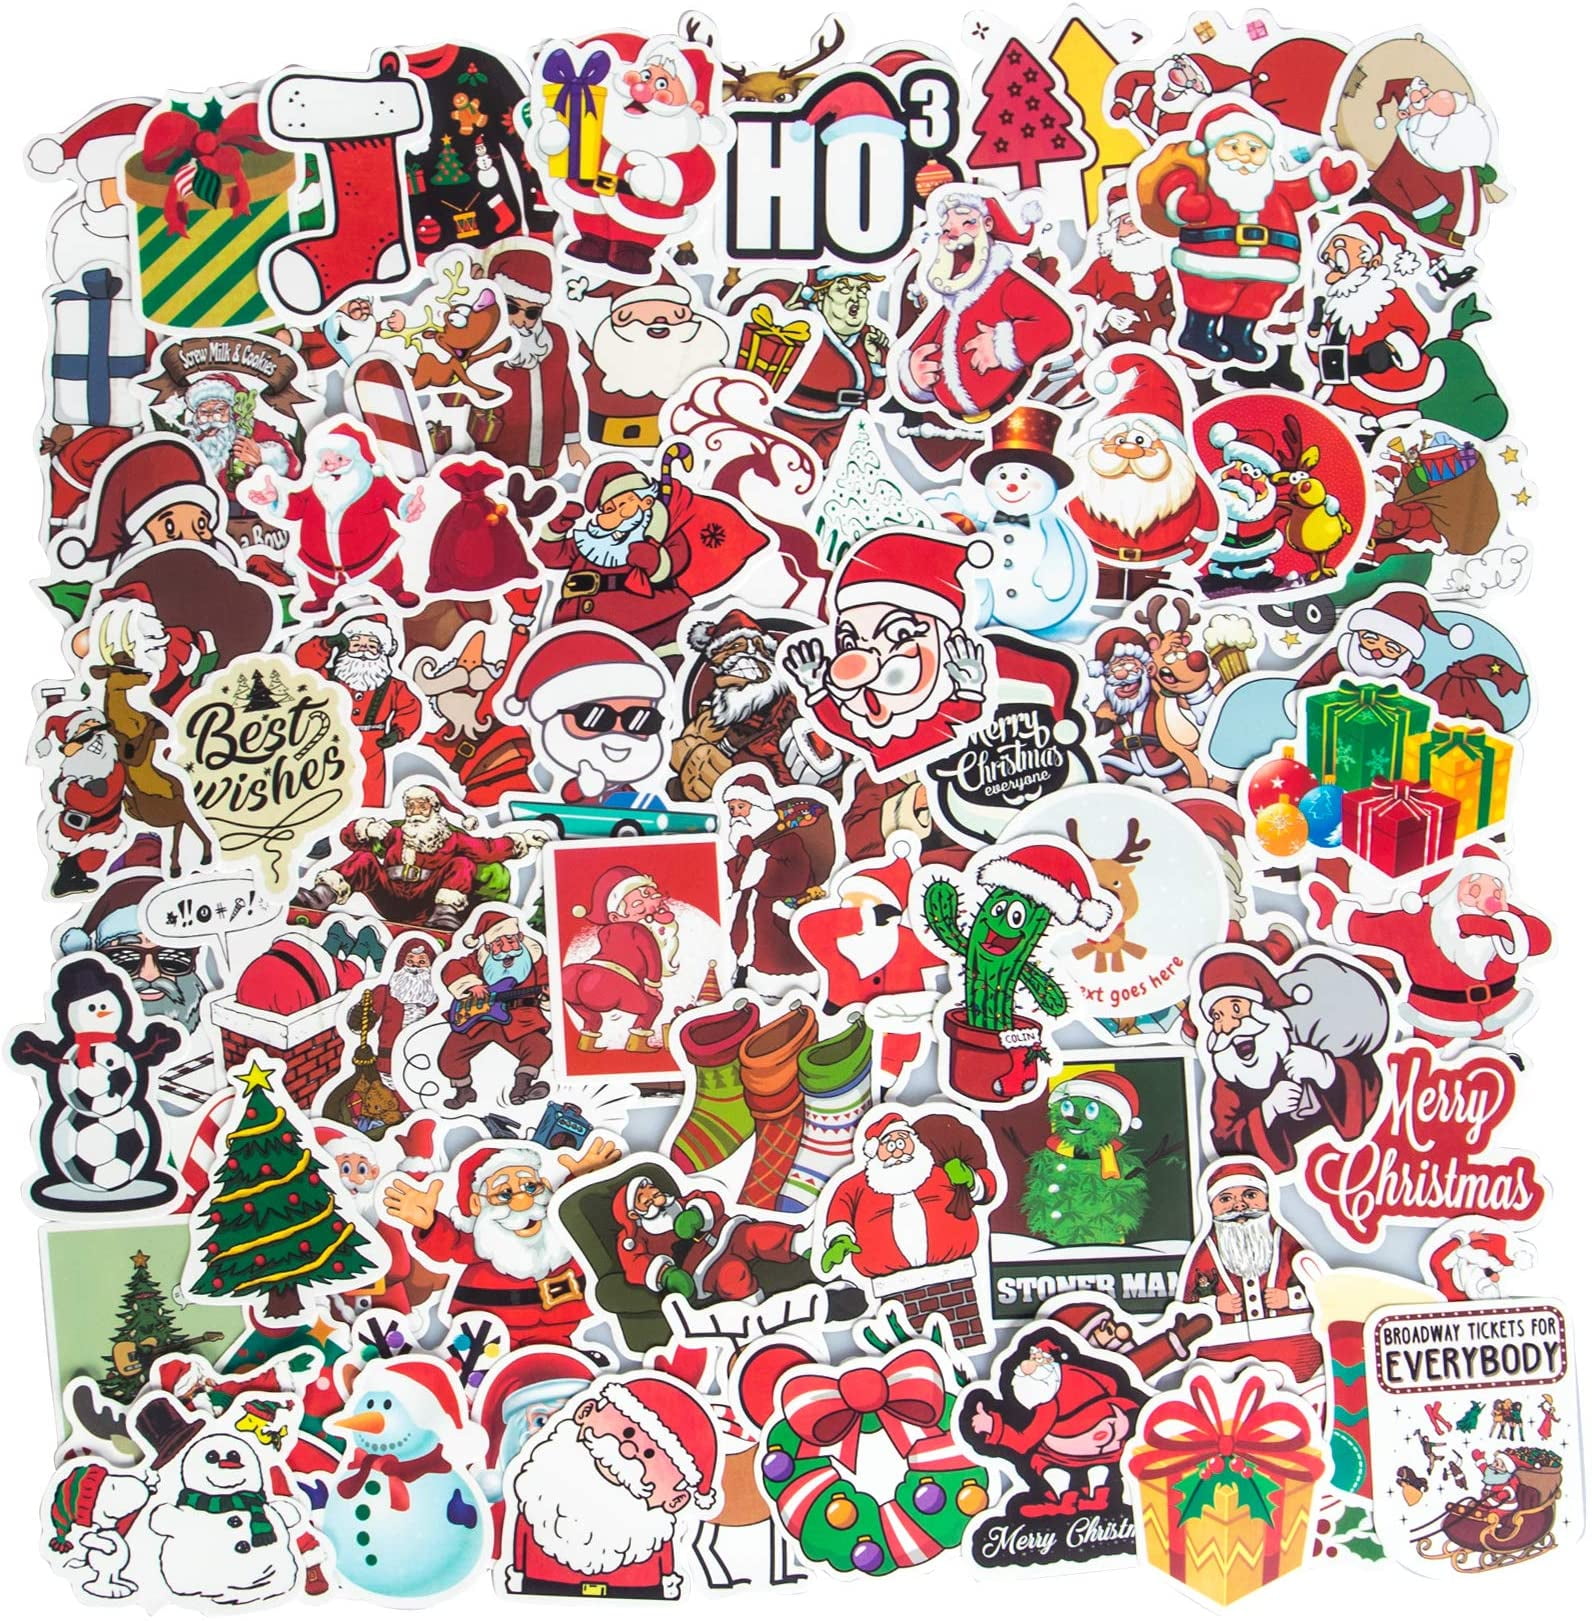 Details about   50/100PCS Mixed Style Bomb Vinyl Laptop Skateboard Stickers Luggage Decals NEW 